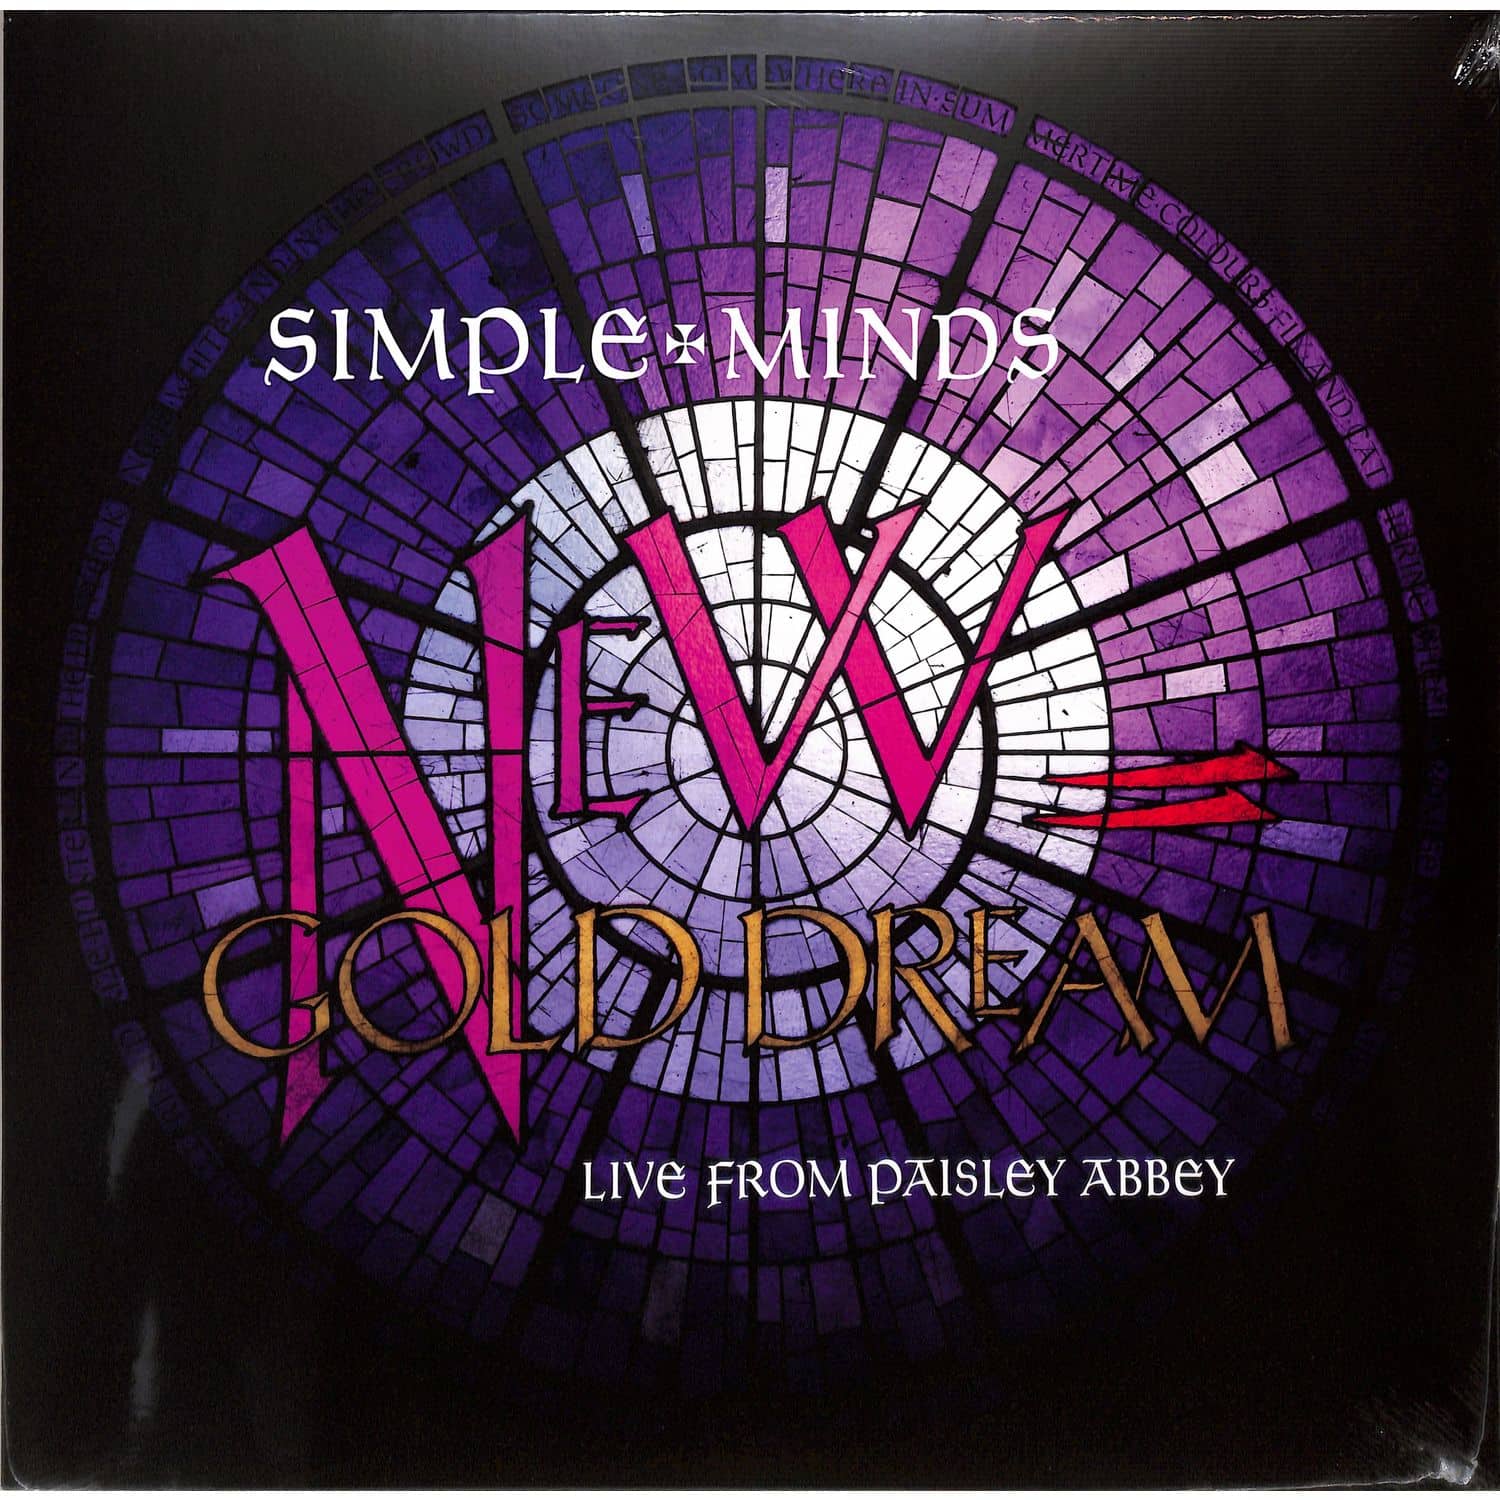 Simple Minds - NEW GOLD DREAM - LIVE FROM PAISLEY ABBEY 